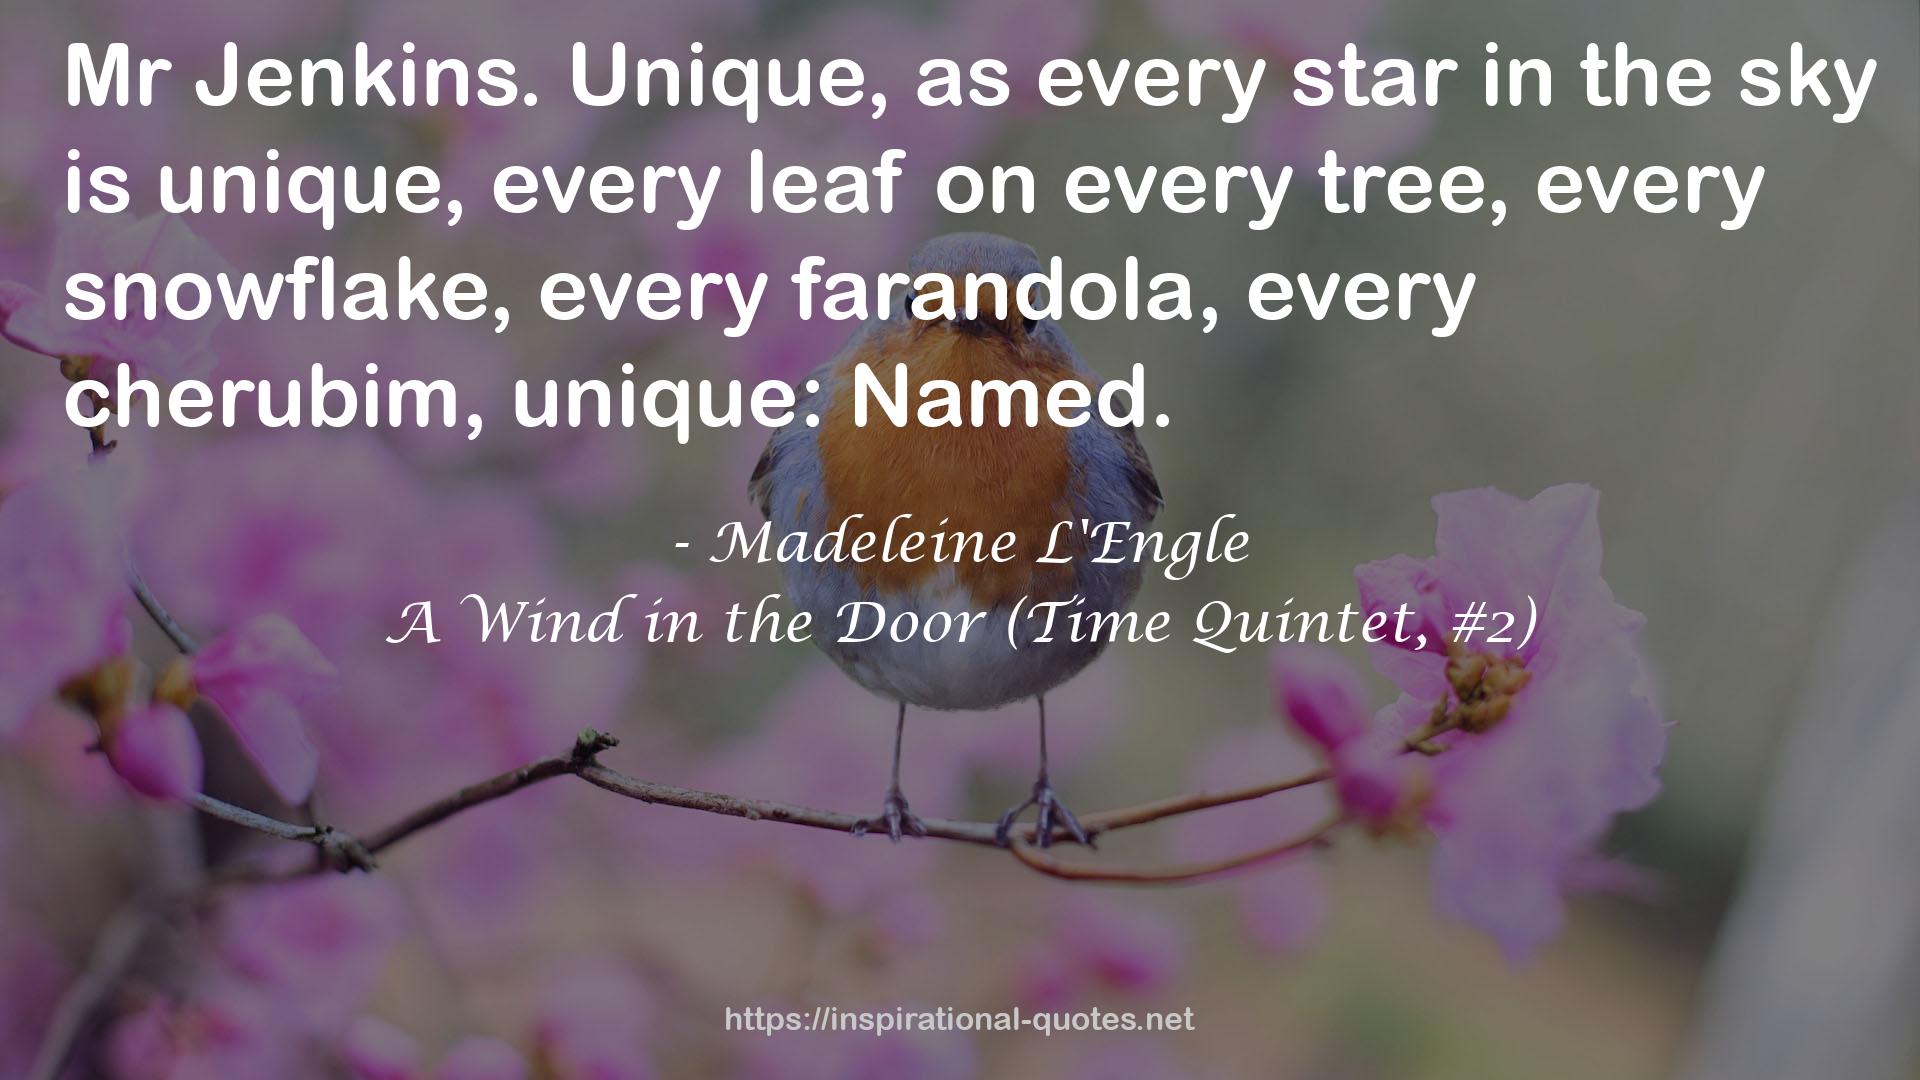 A Wind in the Door (Time Quintet, #2) QUOTES